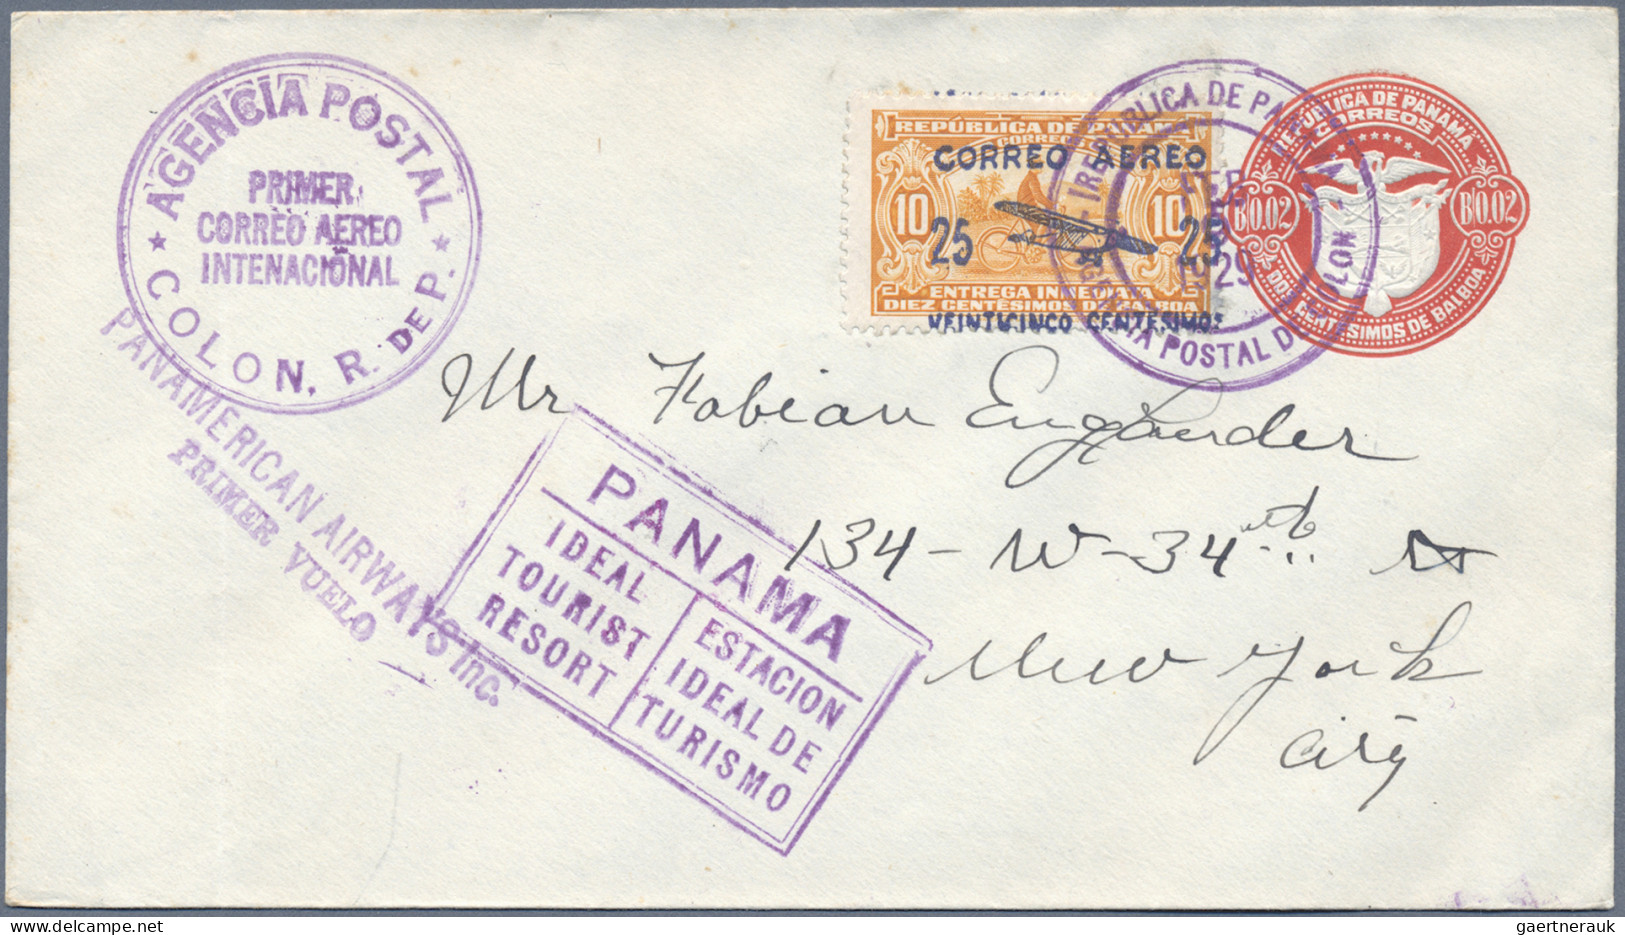 Airmail - Overseas: 1926/1988, assortment of apprx. 164 airmail covers/cards, go